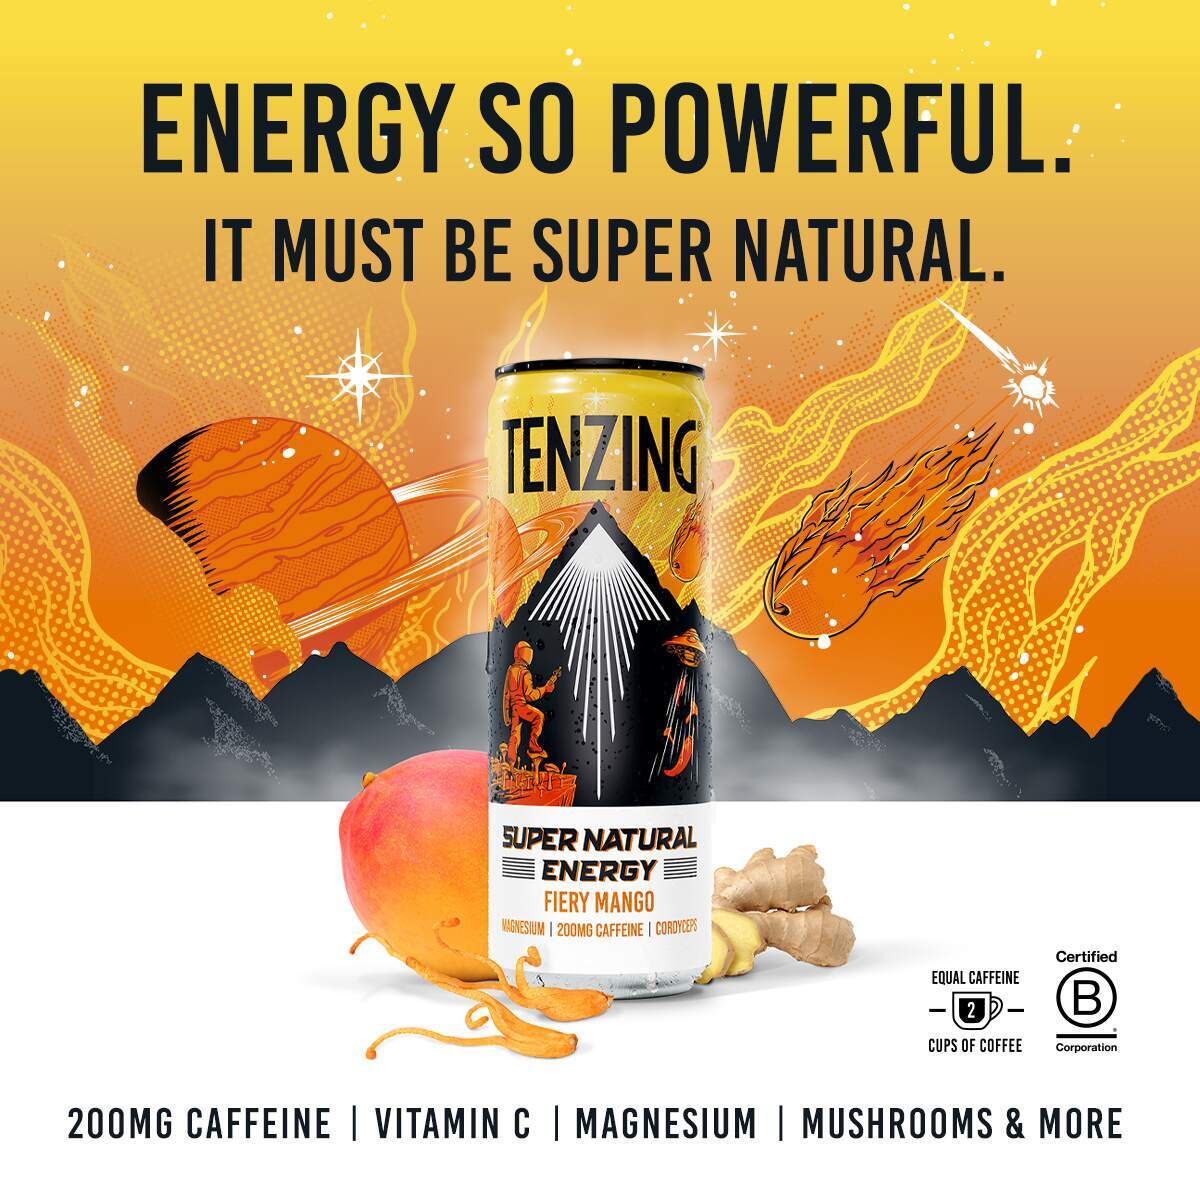 Boundless Brand Design Creates Branding and Packaging Design for Tenzing Natural Energy